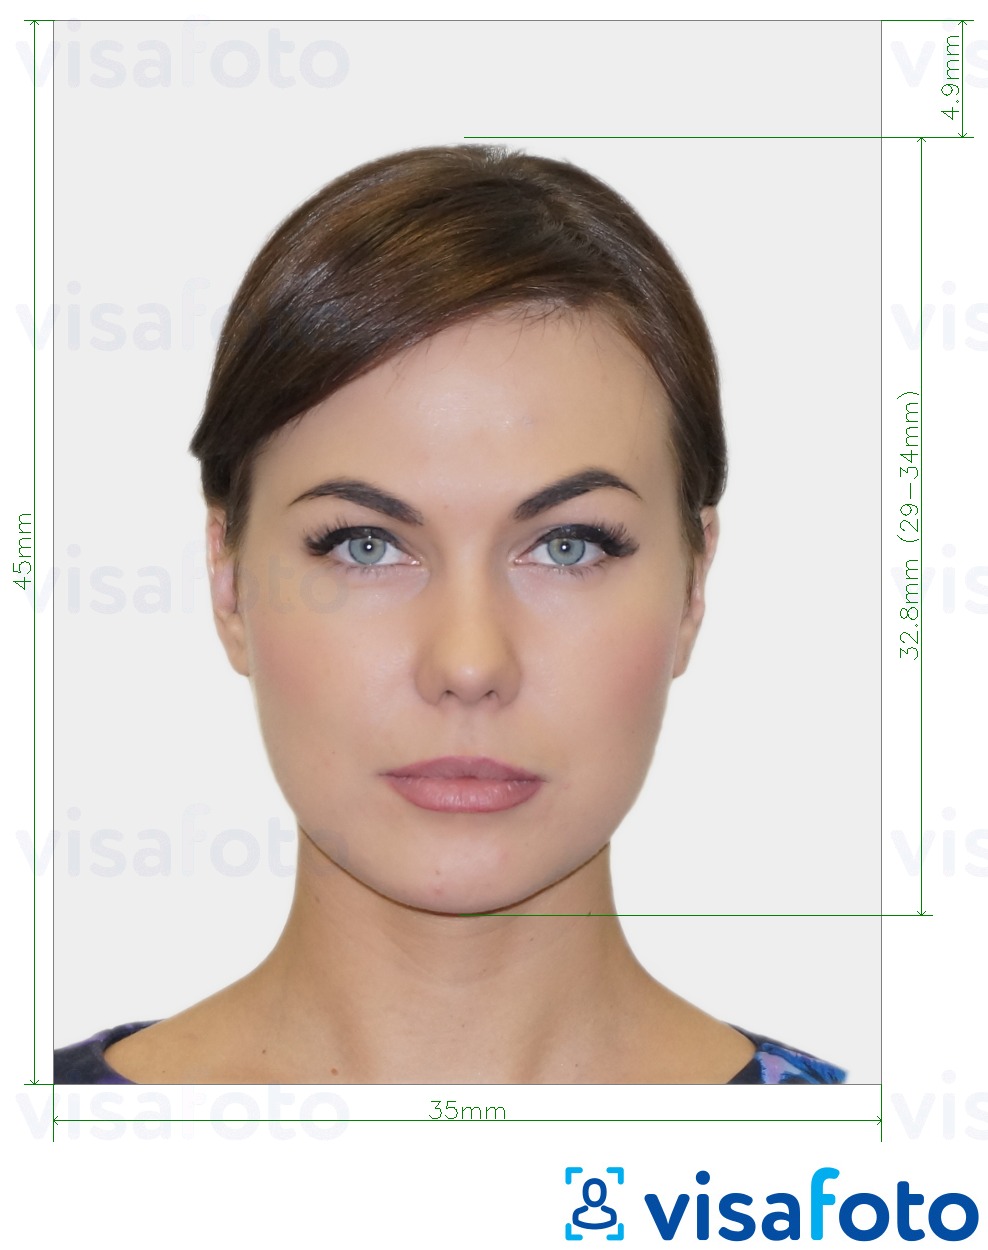 Example of photo for UK Passport offline 35x45 mm (3.5x4.5 cm) with exact size specification